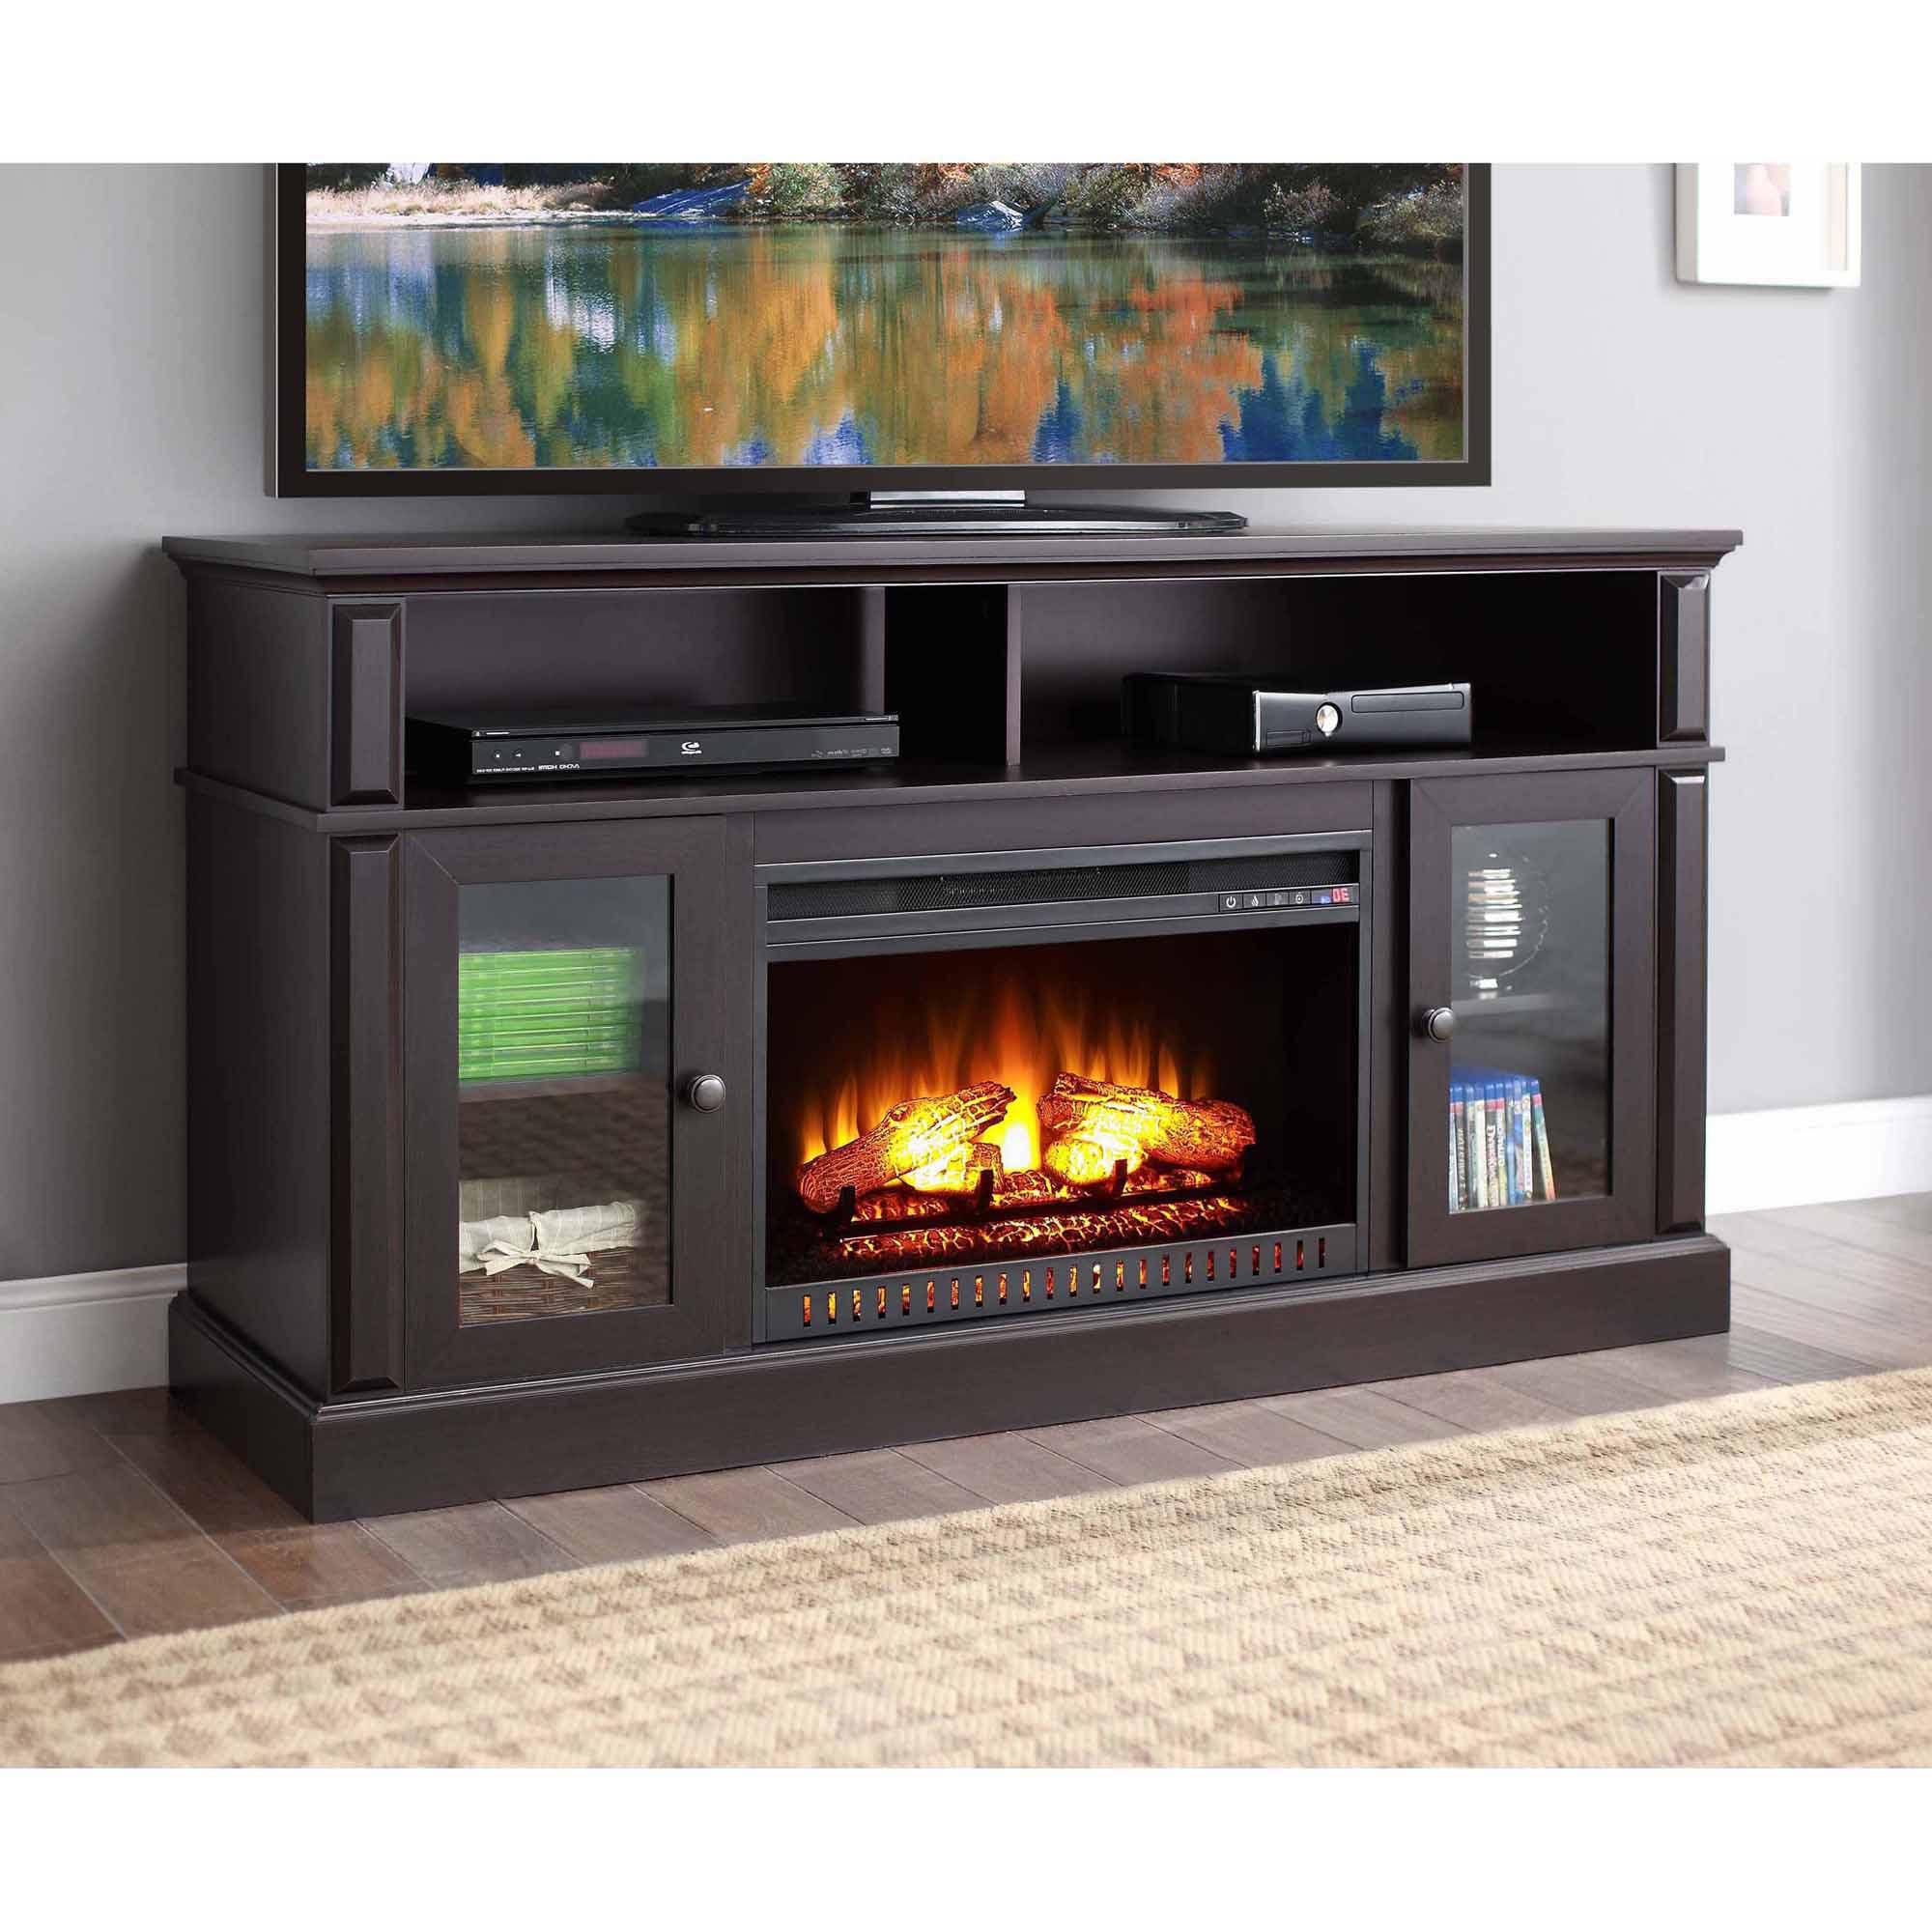 Whalen Barston Media Fireplace For Tv's Up To 70, Multiple Pertaining To Fireplace Media Console Tv Stands With Weathered Finish (Gallery 8 of 20)